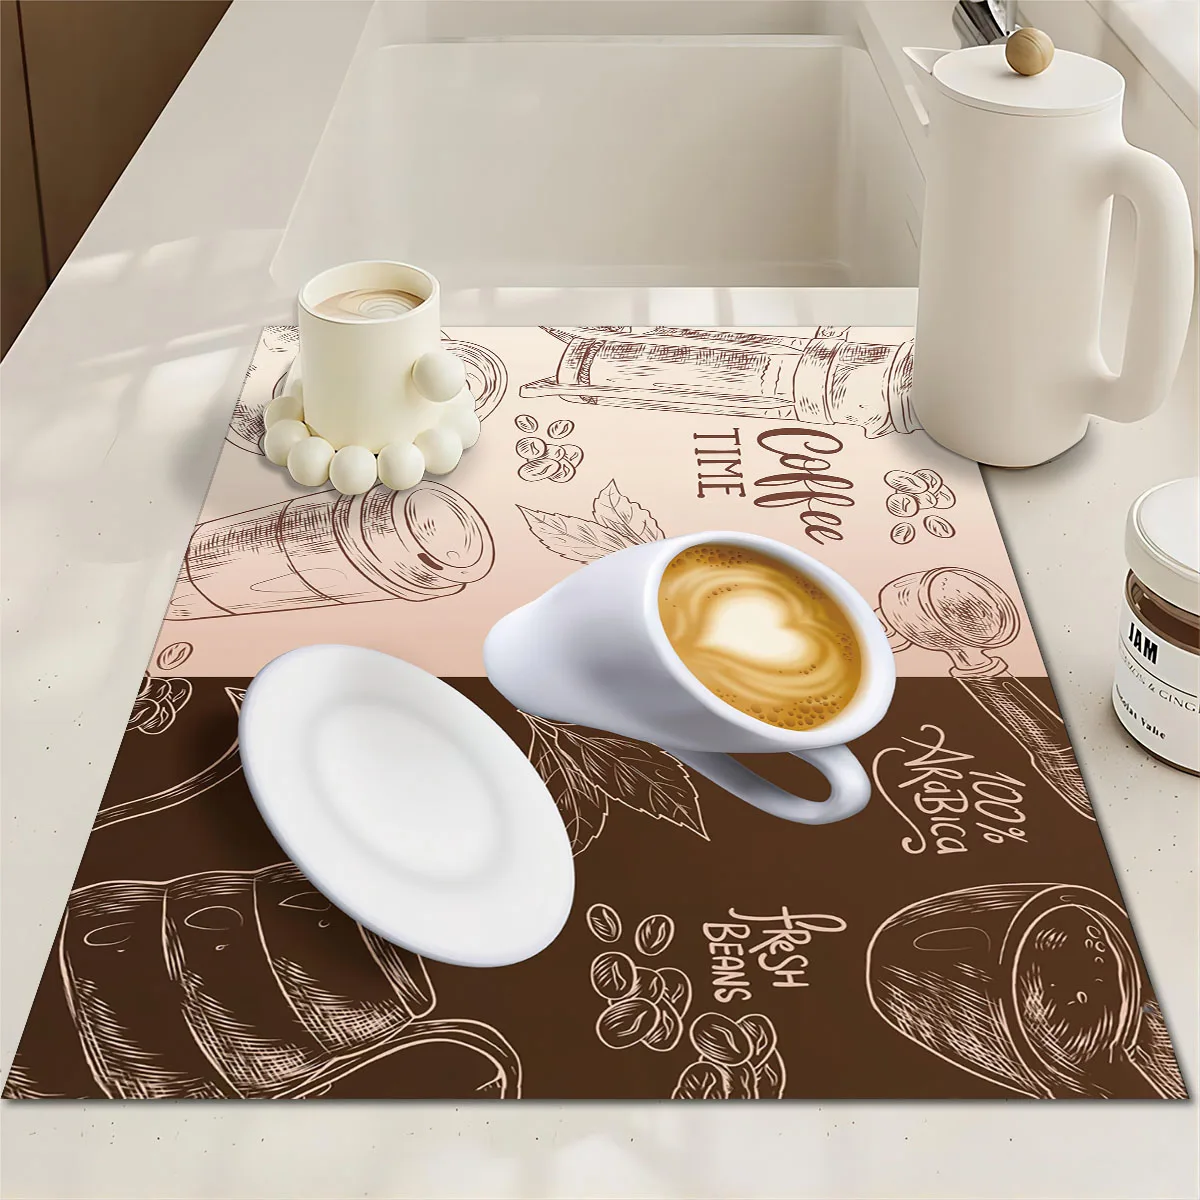 https://ae01.alicdn.com/kf/Sb6ee480a26574c46a0364237506e8af9F/1pc-retro-coffee-patterns-moisture-proof-absorbent-coffee-pads-coffee-bar-accessories-rubber-absorbent-dishwashing-pads.jpg